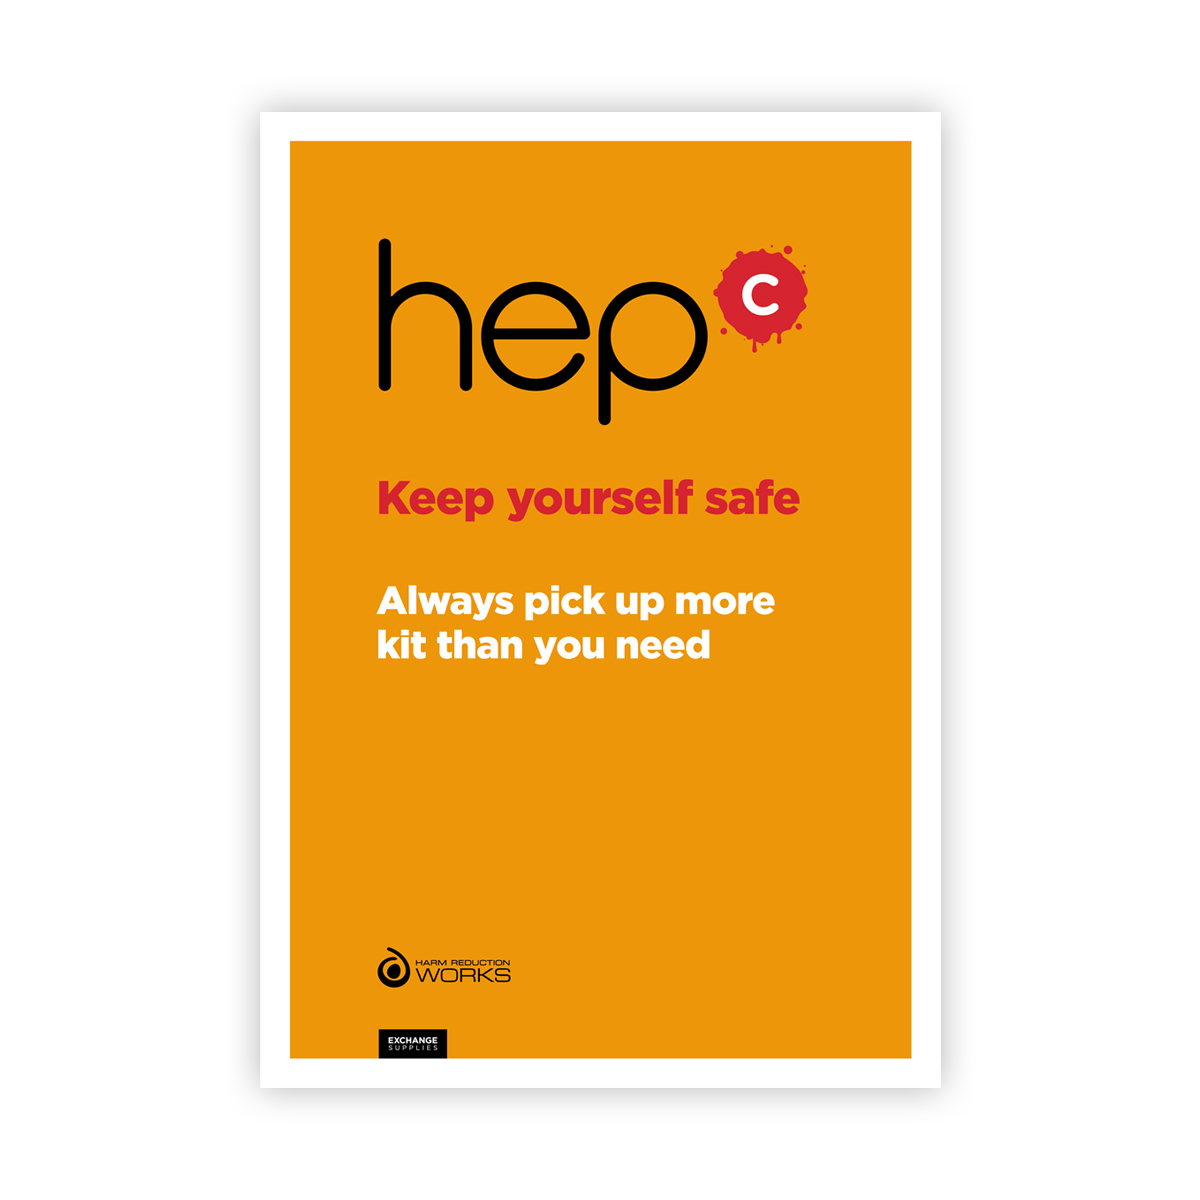 Keep yourself safe: pick up more than you need poster